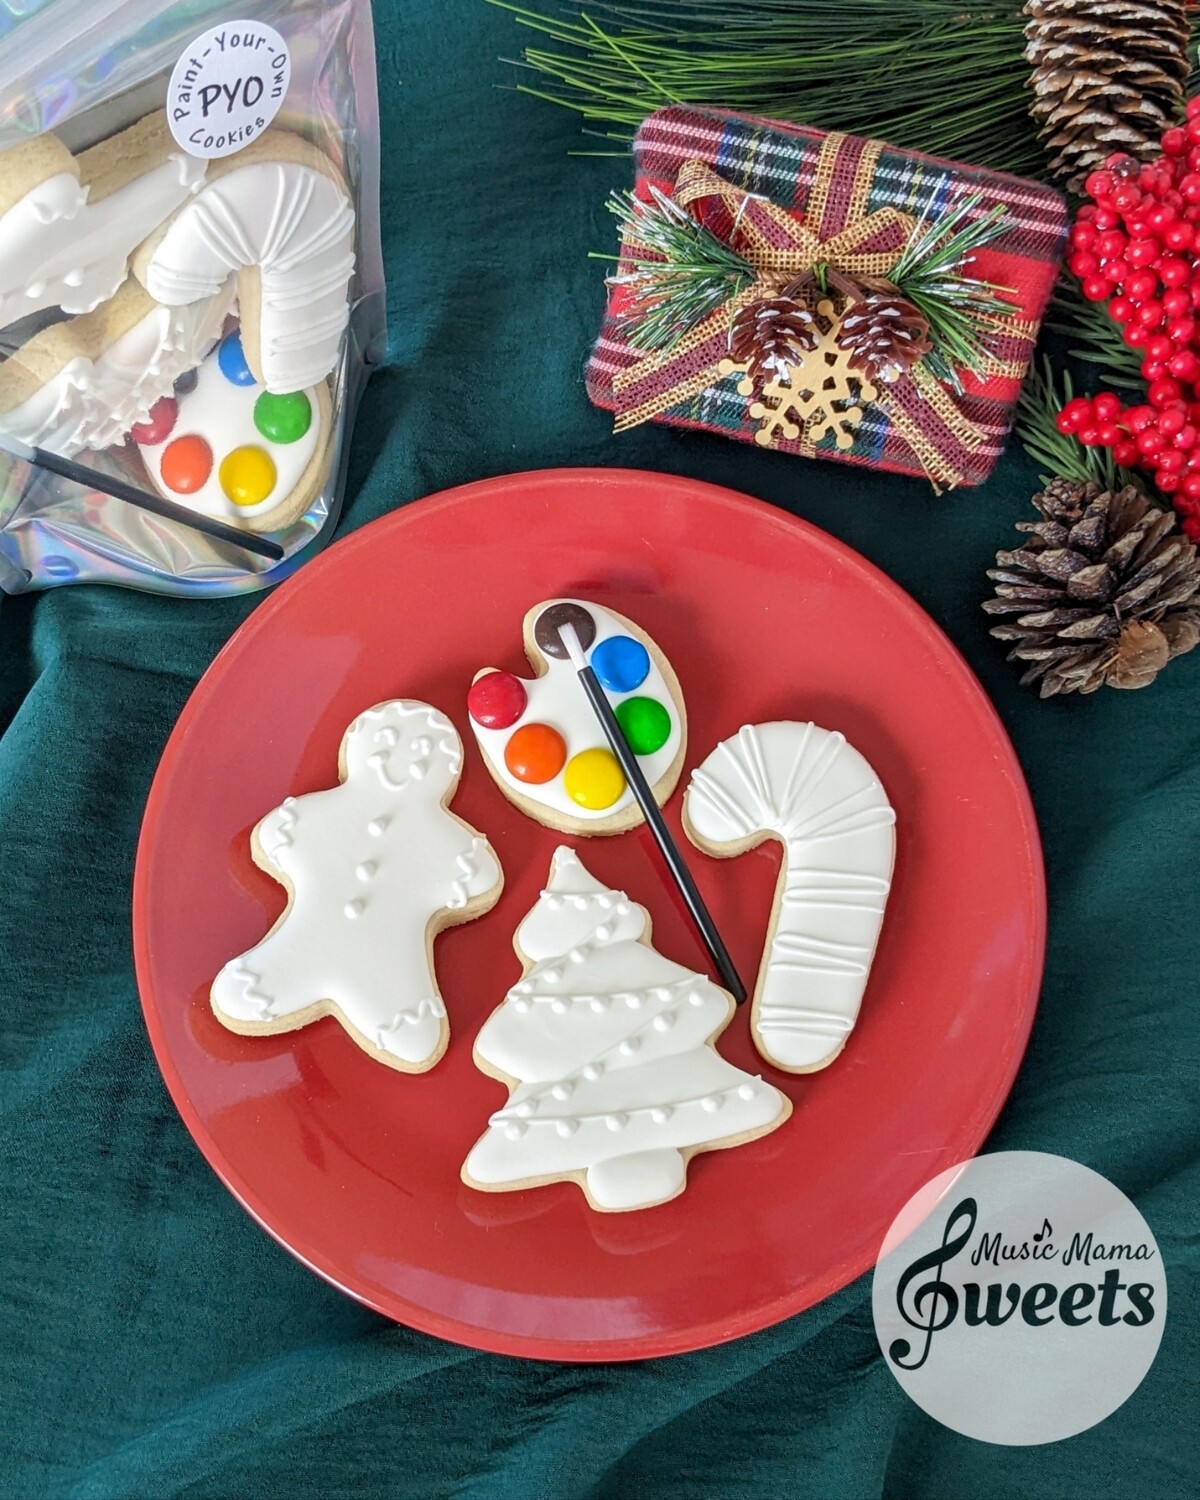 Paint-Your-Own Cookies (Set of 3)